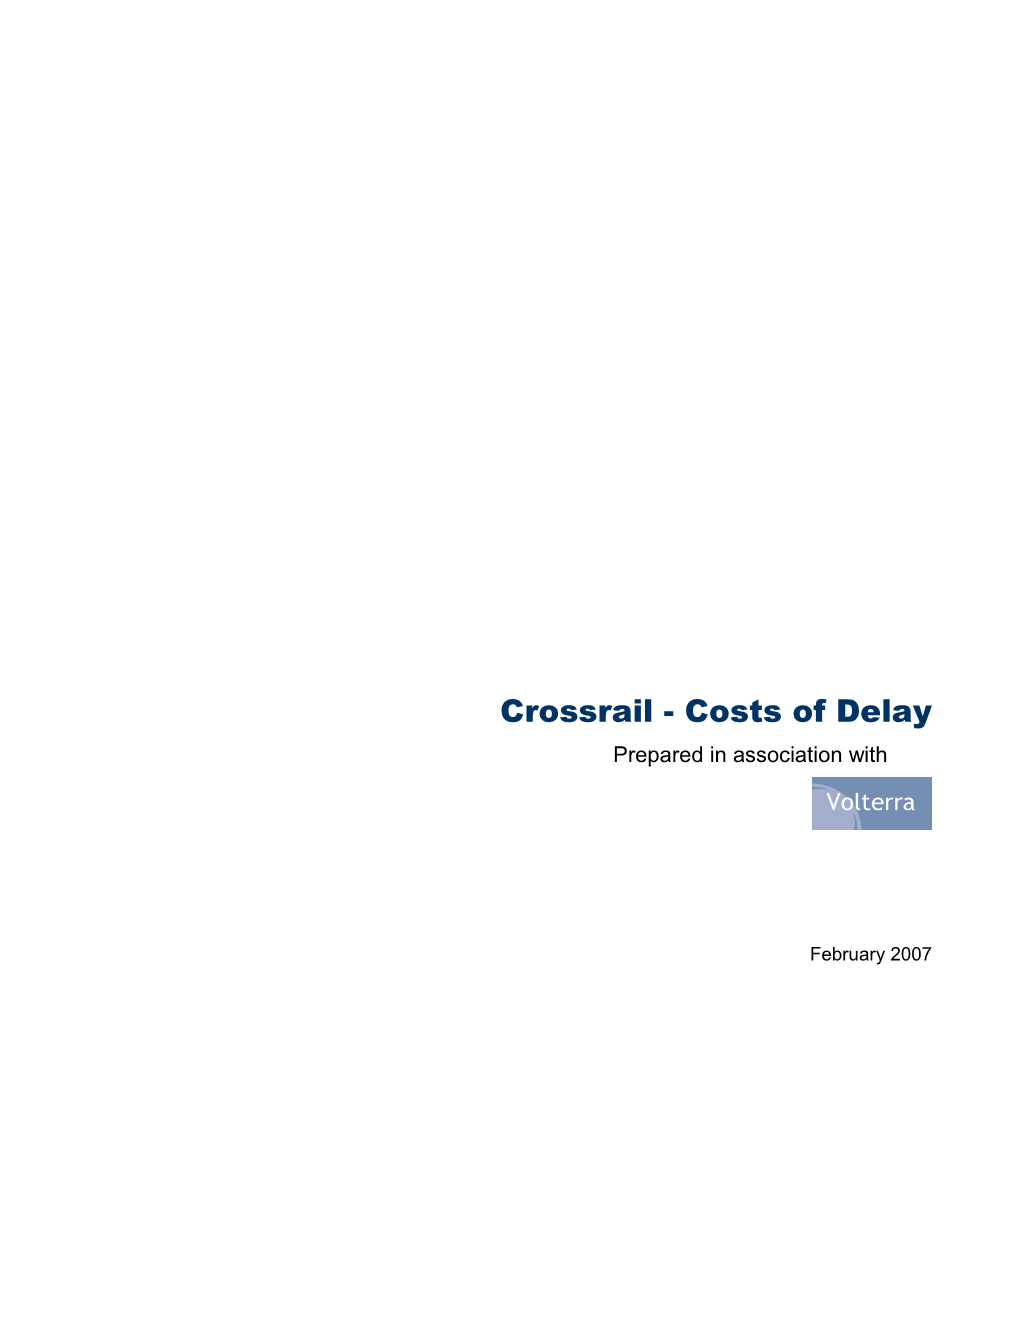 Crossrail - Costs of Delay Prepared in Association With